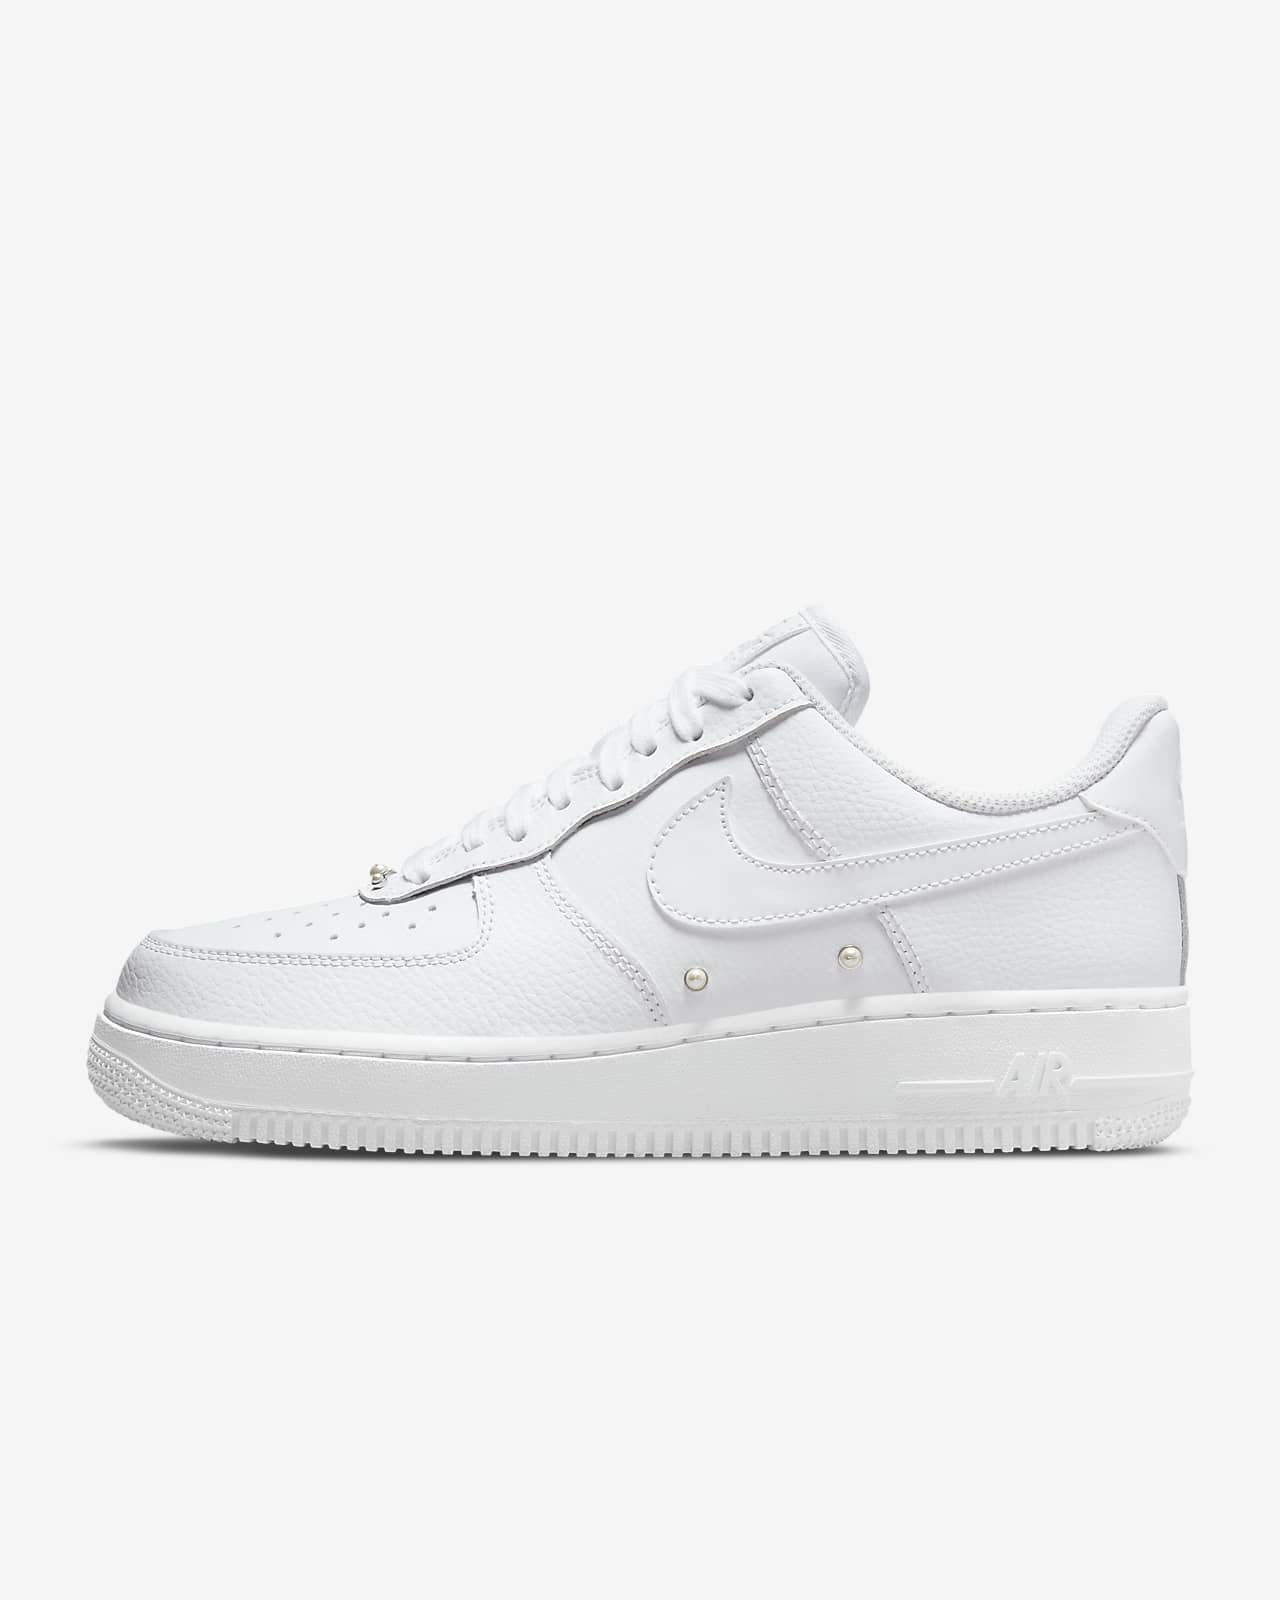 Nike Air Force air force 1 07 1 '07 SE Women's Shoes